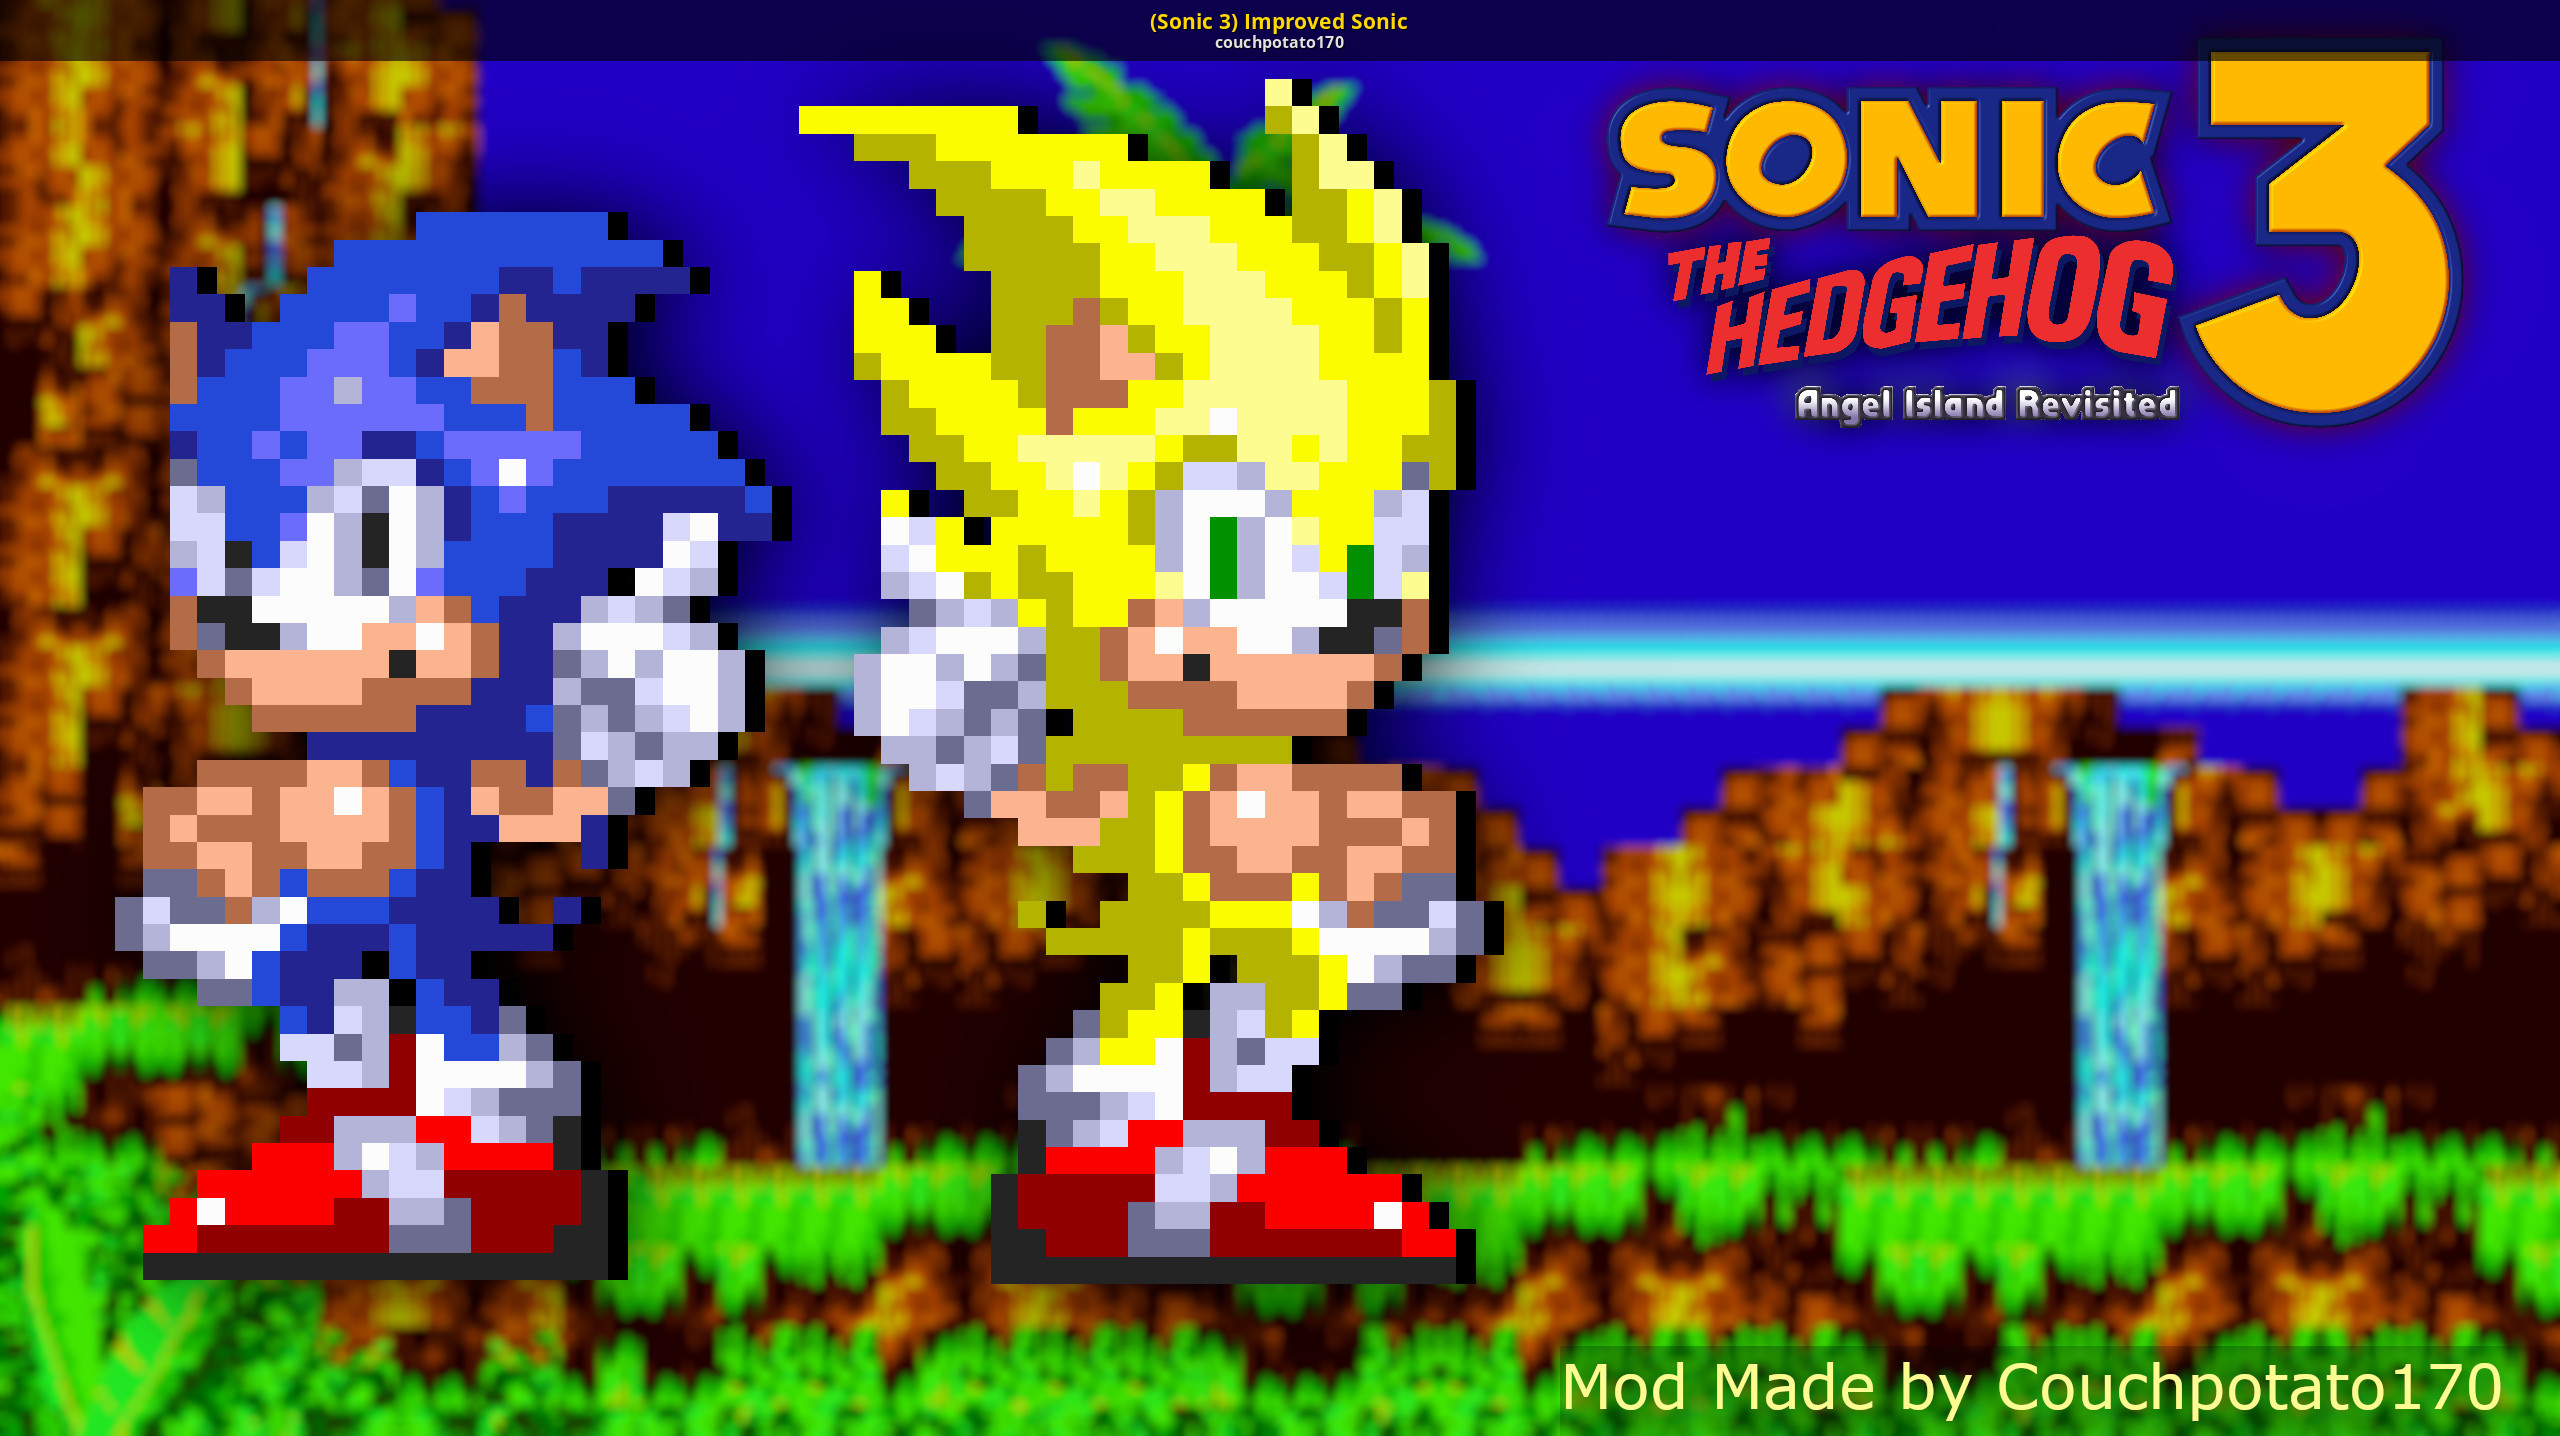 5 Different Super Sonic in Sonic 3 ~ Sonic 3 A.I.R. mods ~ Gameplay 